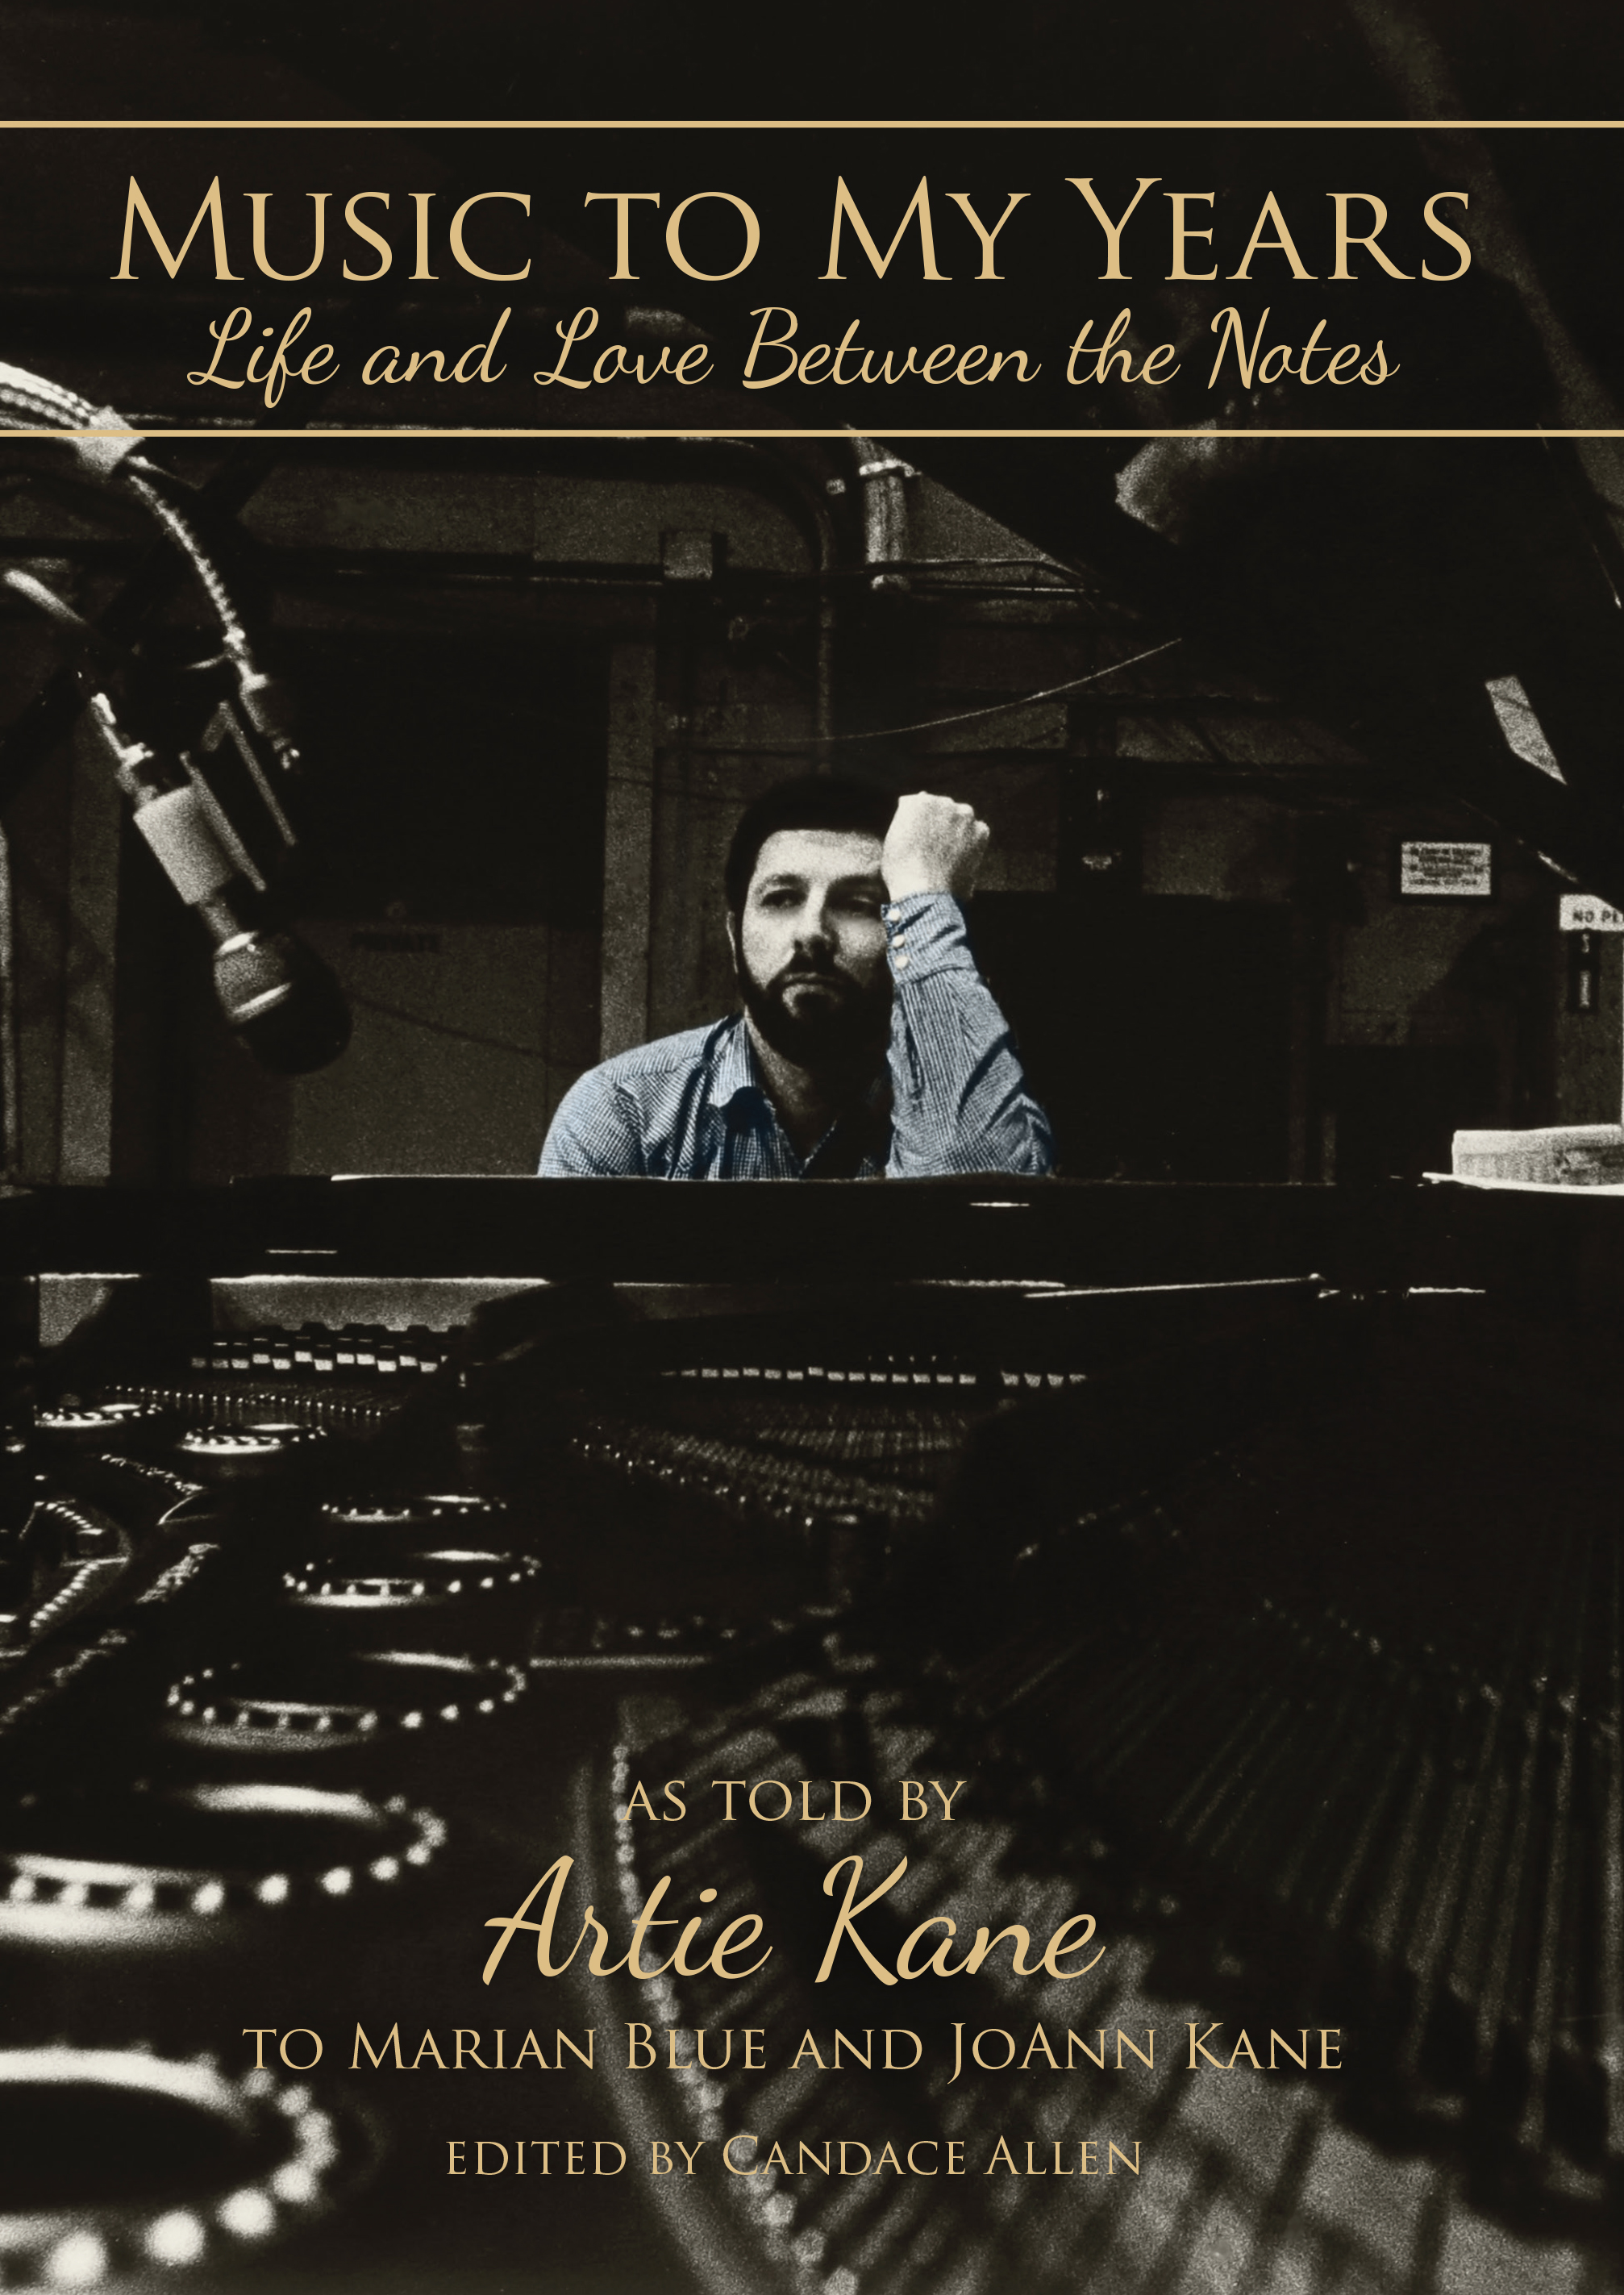 Artie Kane's Music To My Years: Life and Love Between the Notes